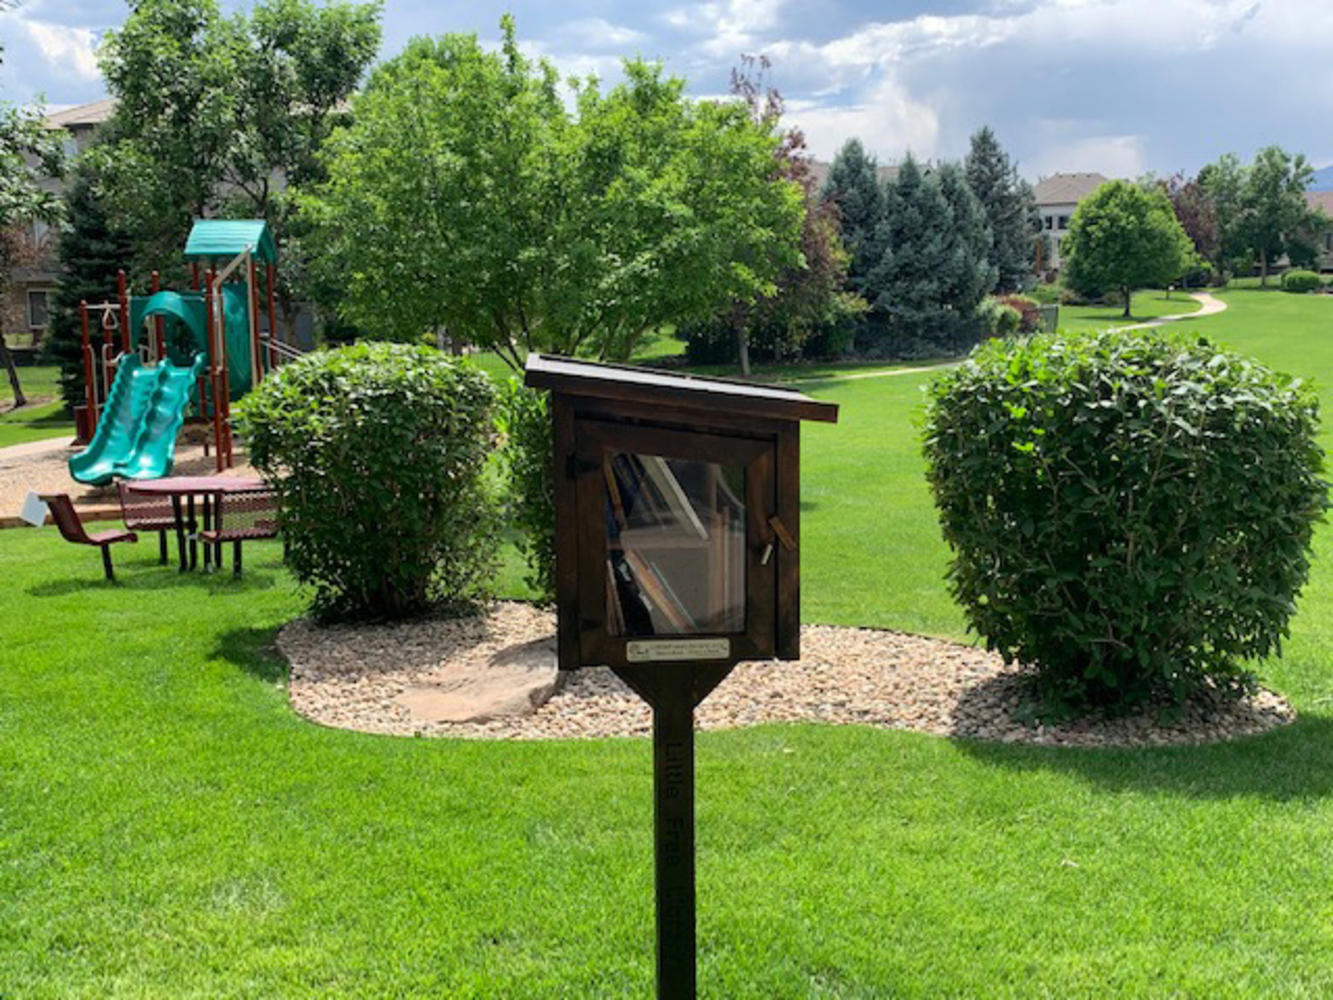 Free Little Library Exchange at Tot Lot